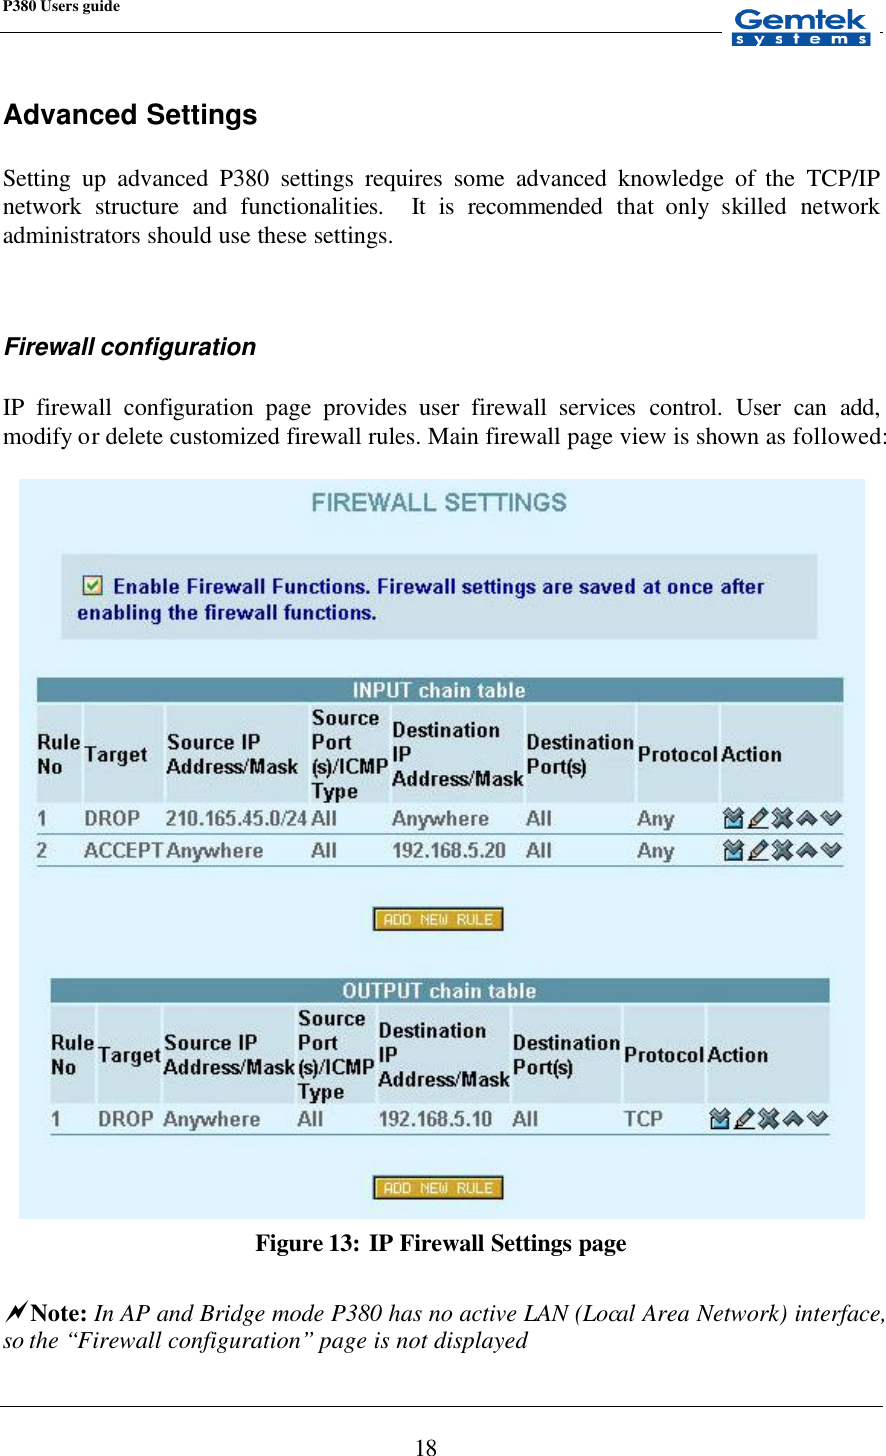 P380 Users guide            18 Advanced Settings  Setting up advanced P380 settings requires some advanced knowledge of the  TCP/IP network structure and functionalities.   It is recommended that only skilled network administrators should use these settings.   Firewall configuration  IP firewall configuration page provides user firewall services control. User can add, modify or delete customized firewall rules. Main firewall page view is shown as followed:   Figure 13: IP Firewall Settings page  ~Note: In AP and Bridge mode P380 has no active LAN (Local Area Network) interface, so the “Firewall configuration” page is not displayed  